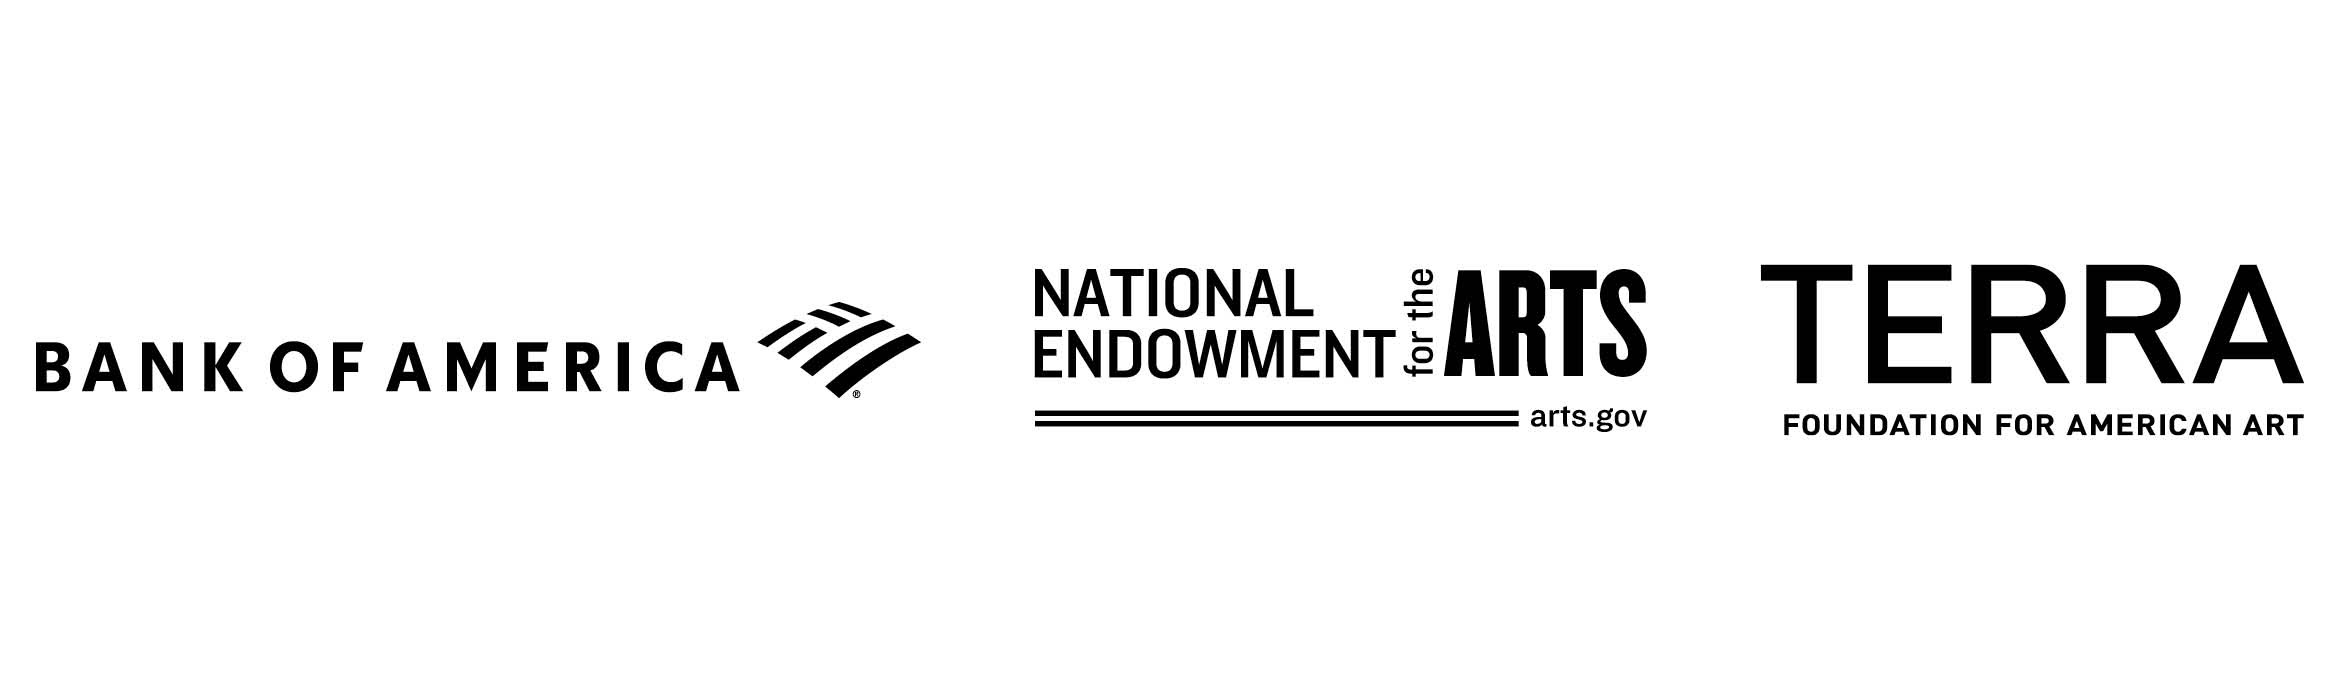 Bank of America, Terra Foundation and National Endowment for the Arts Logos in Black